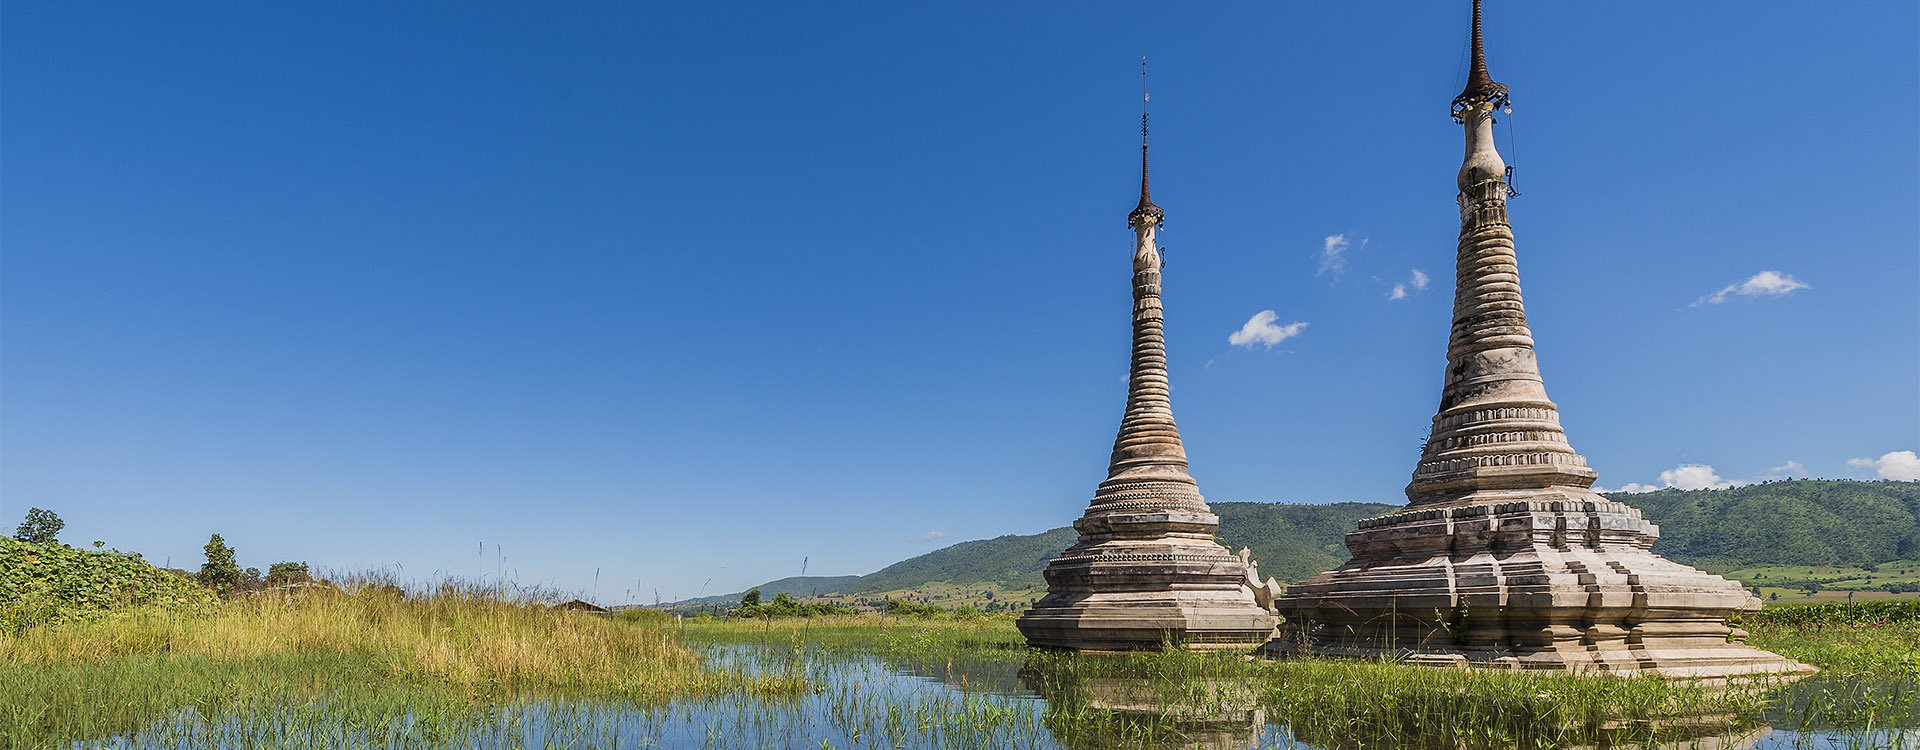 the Pagoda in Inle lake, Myanmar on a clear sunny day